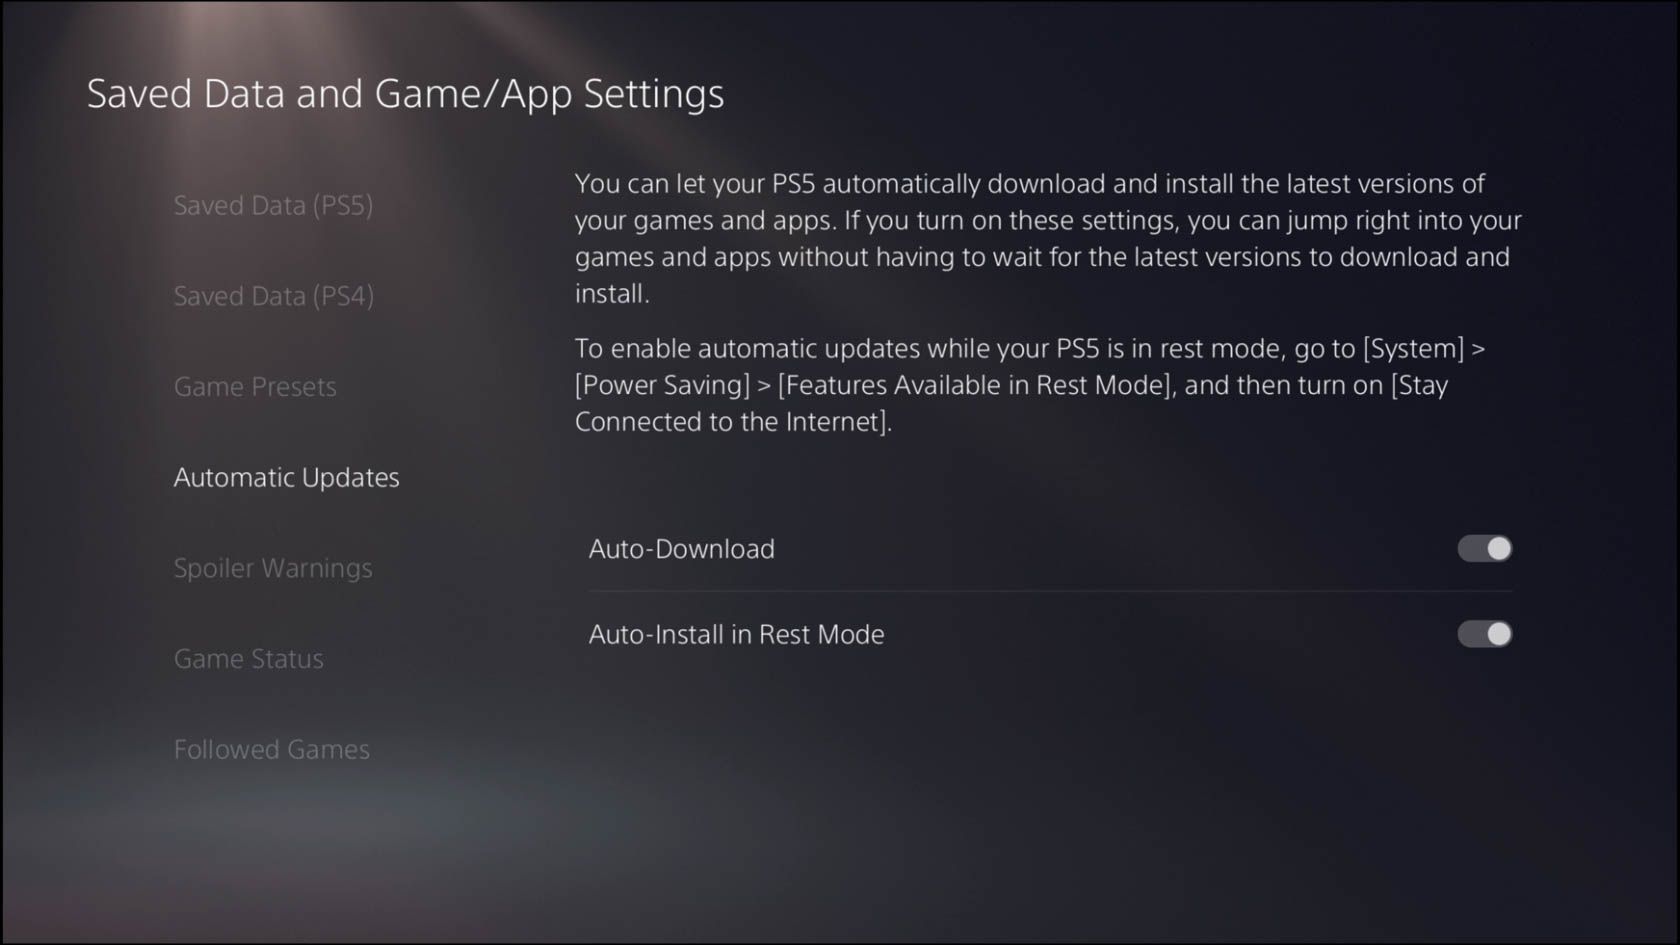 Enabling automatic updates on PS5